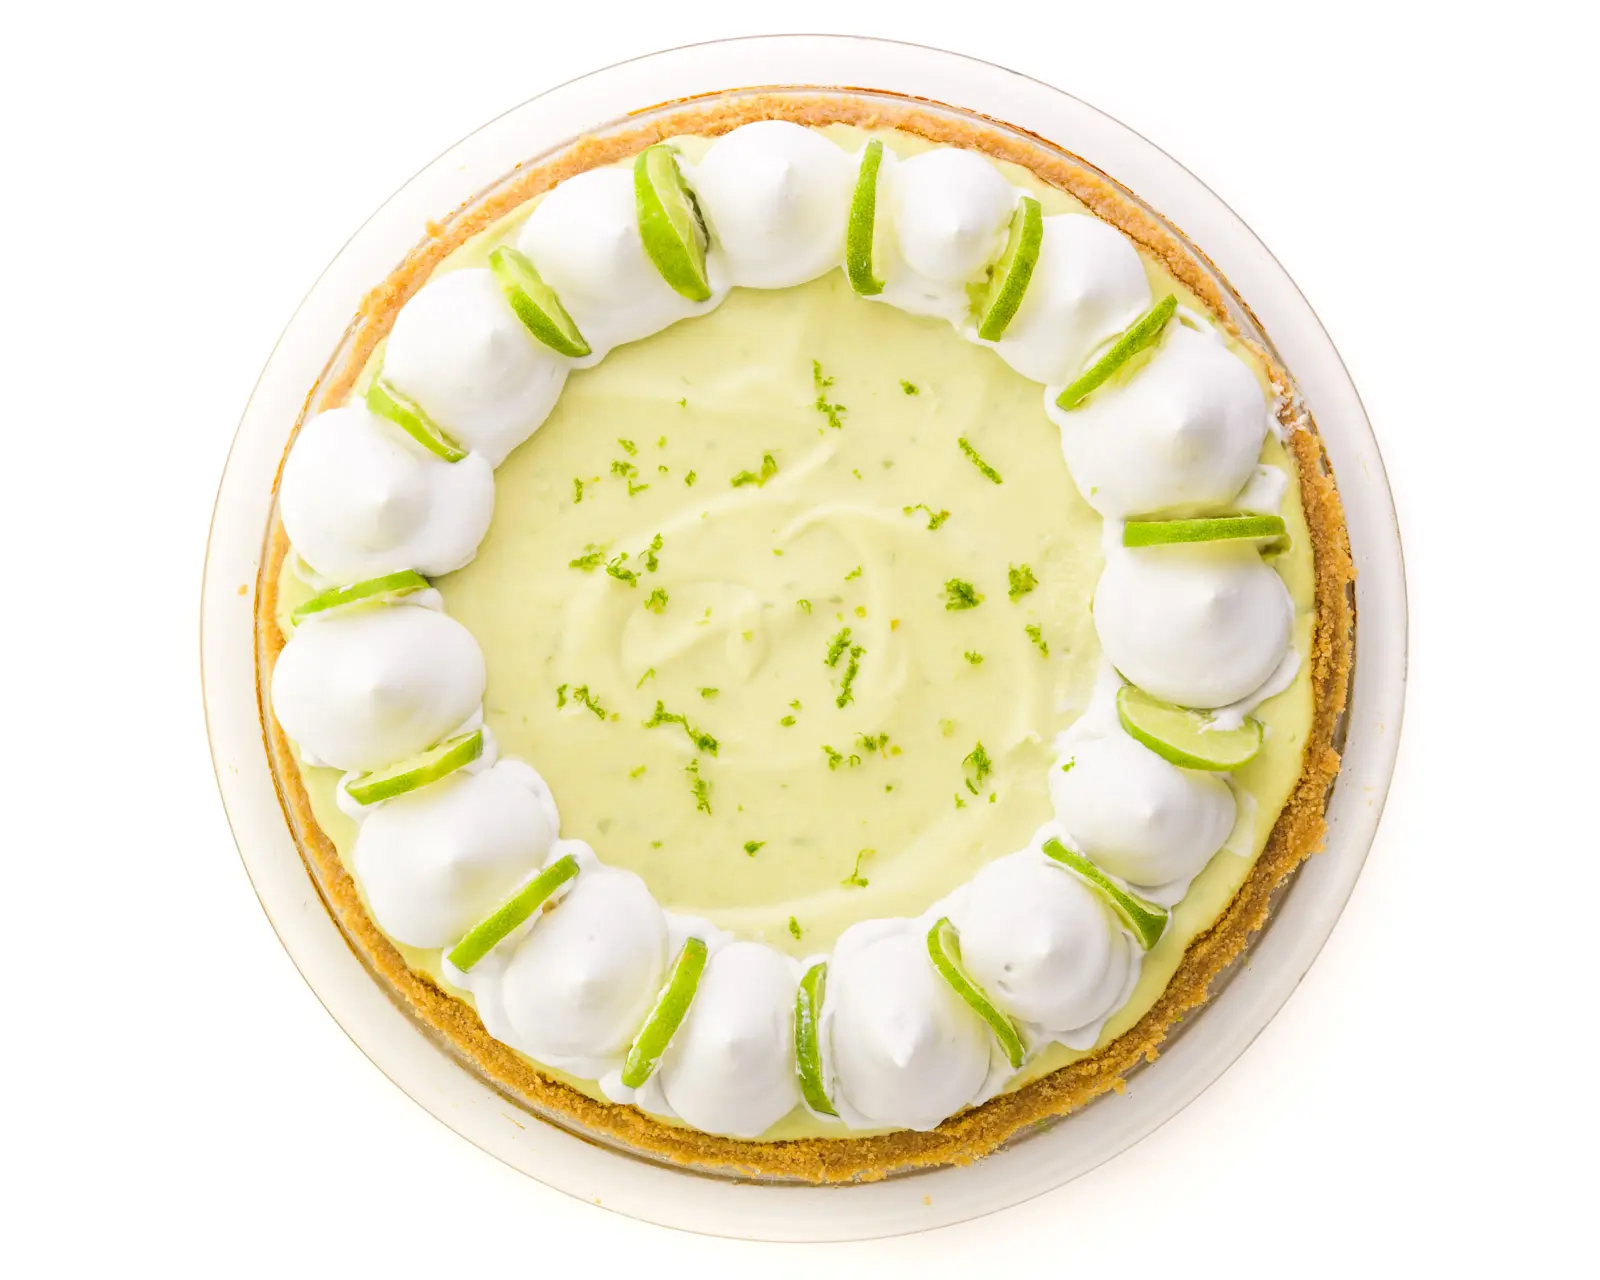 Looking down on a key lime pie with whipped cream dollops around the edges and lime slices.